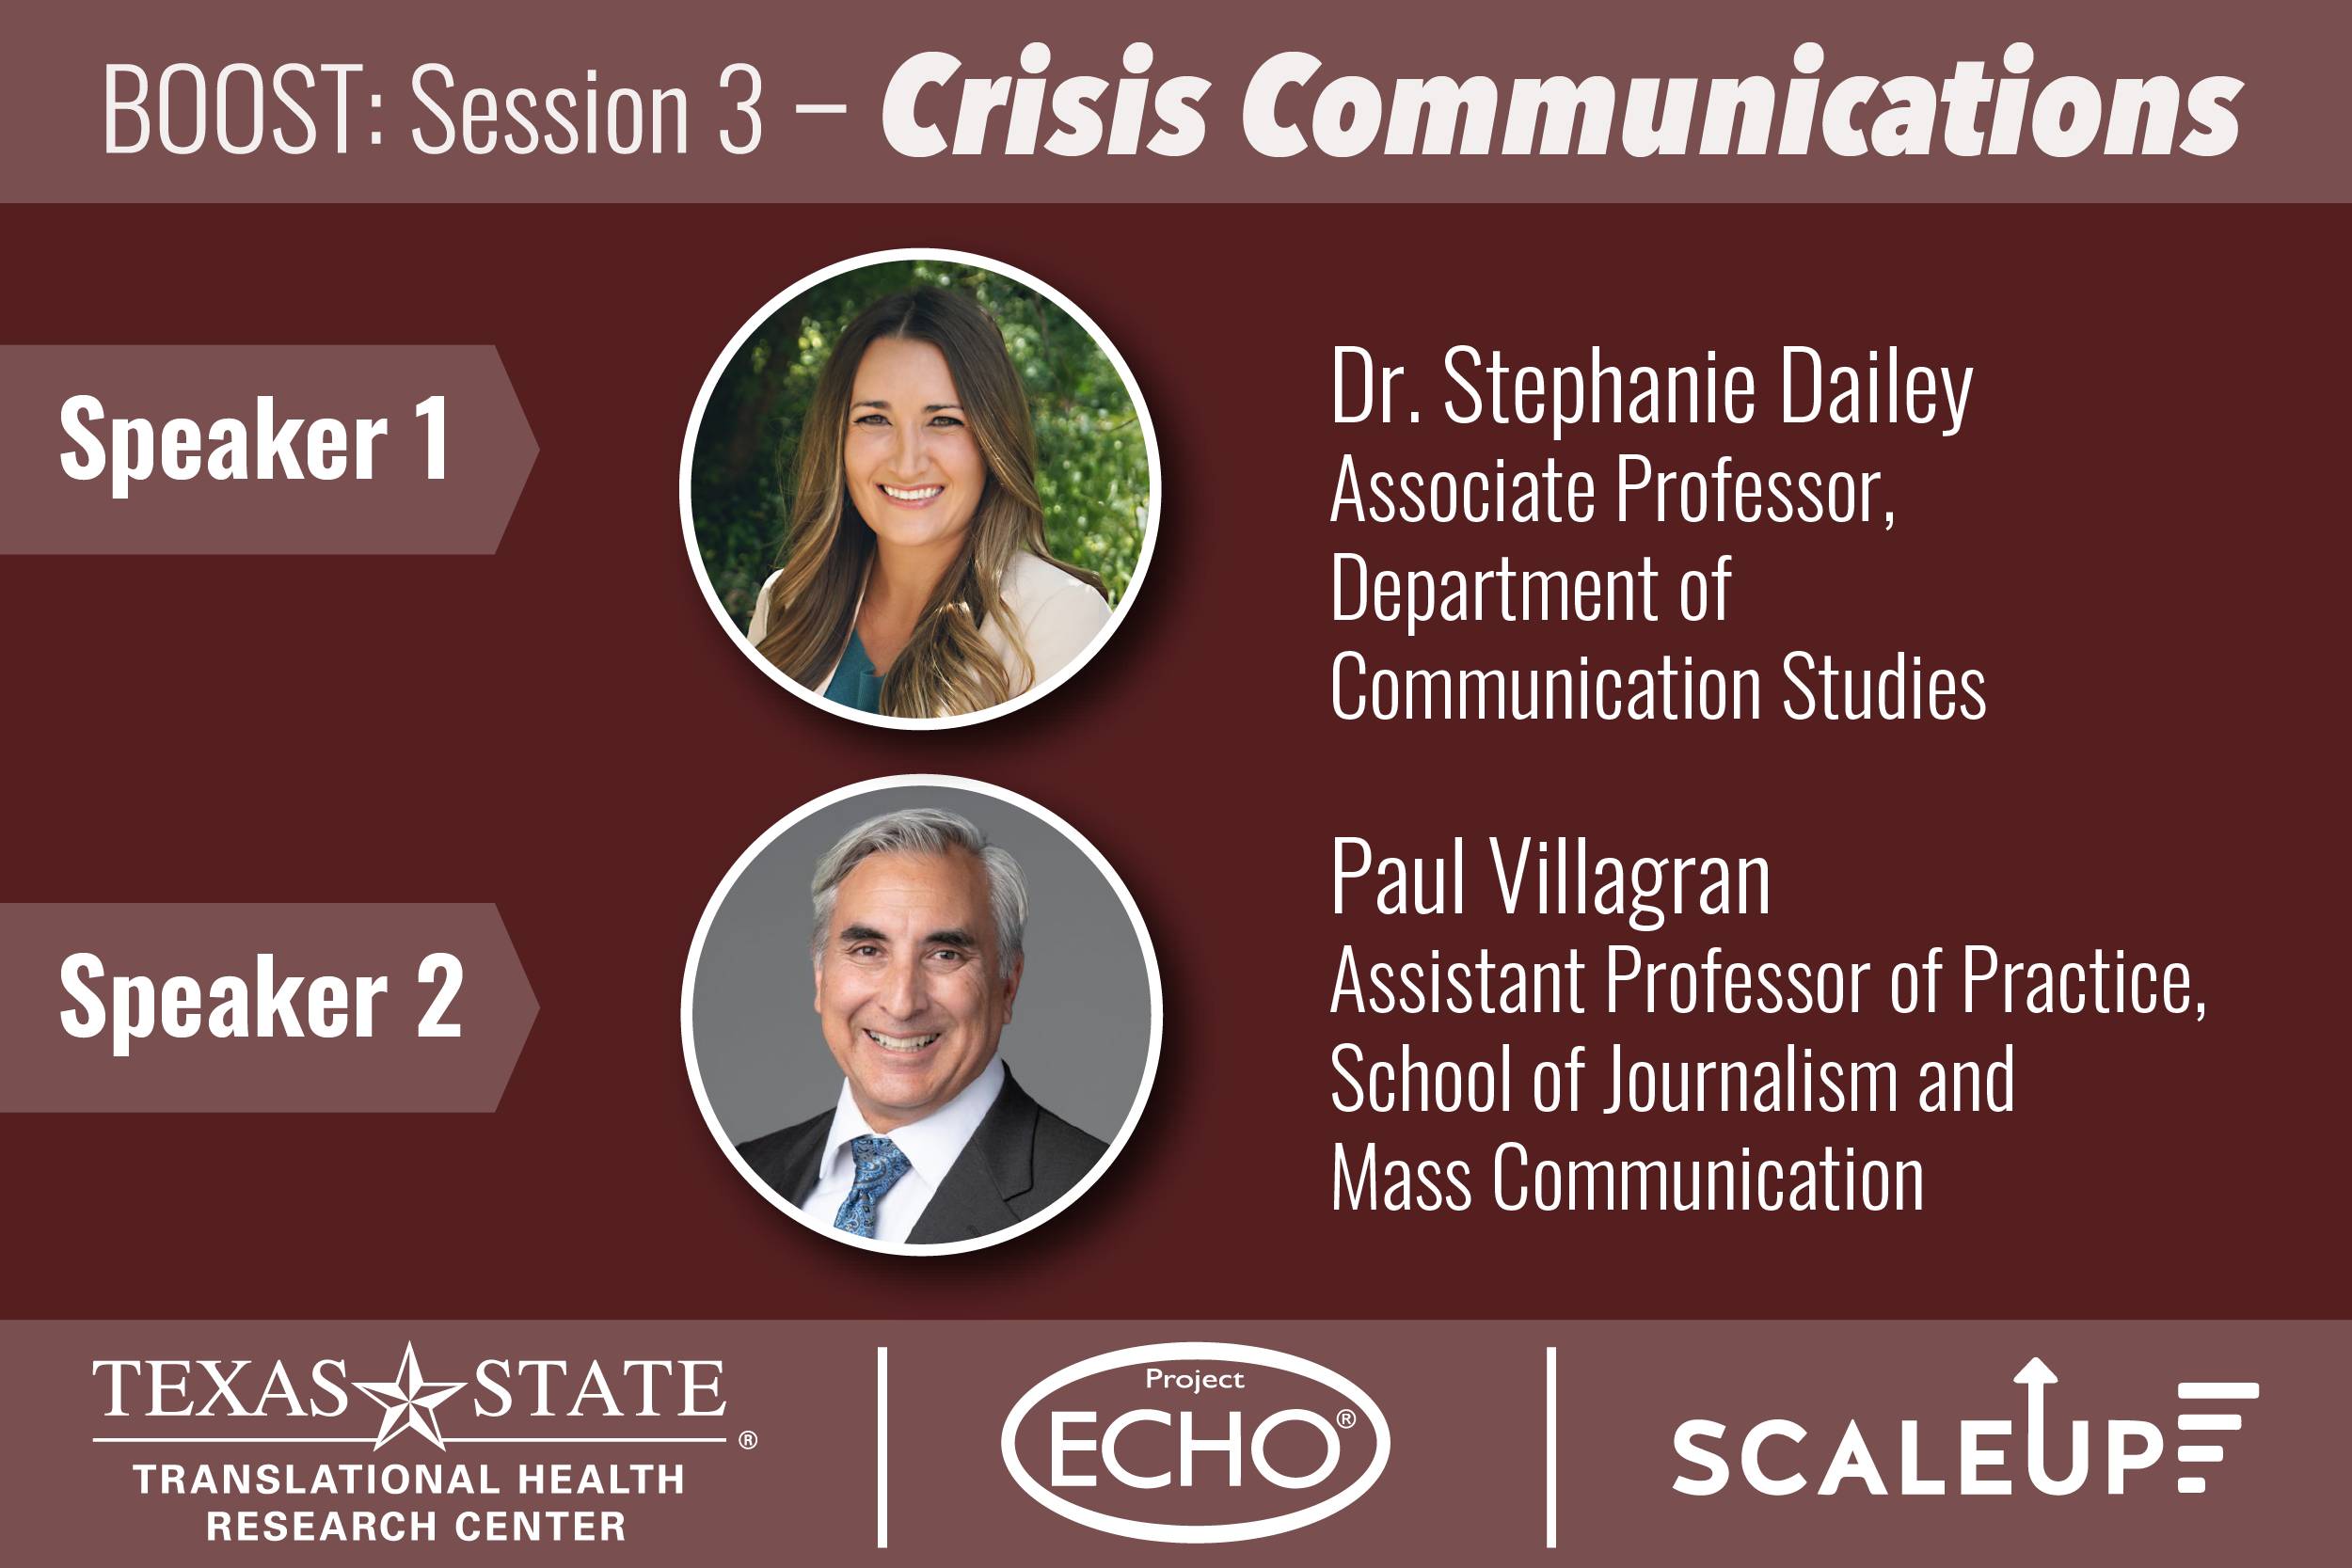 BOOST Session 3 with Speakers Dr. Stephanie Dailey and Paul Villagran talk on the topic of Crisis Communications